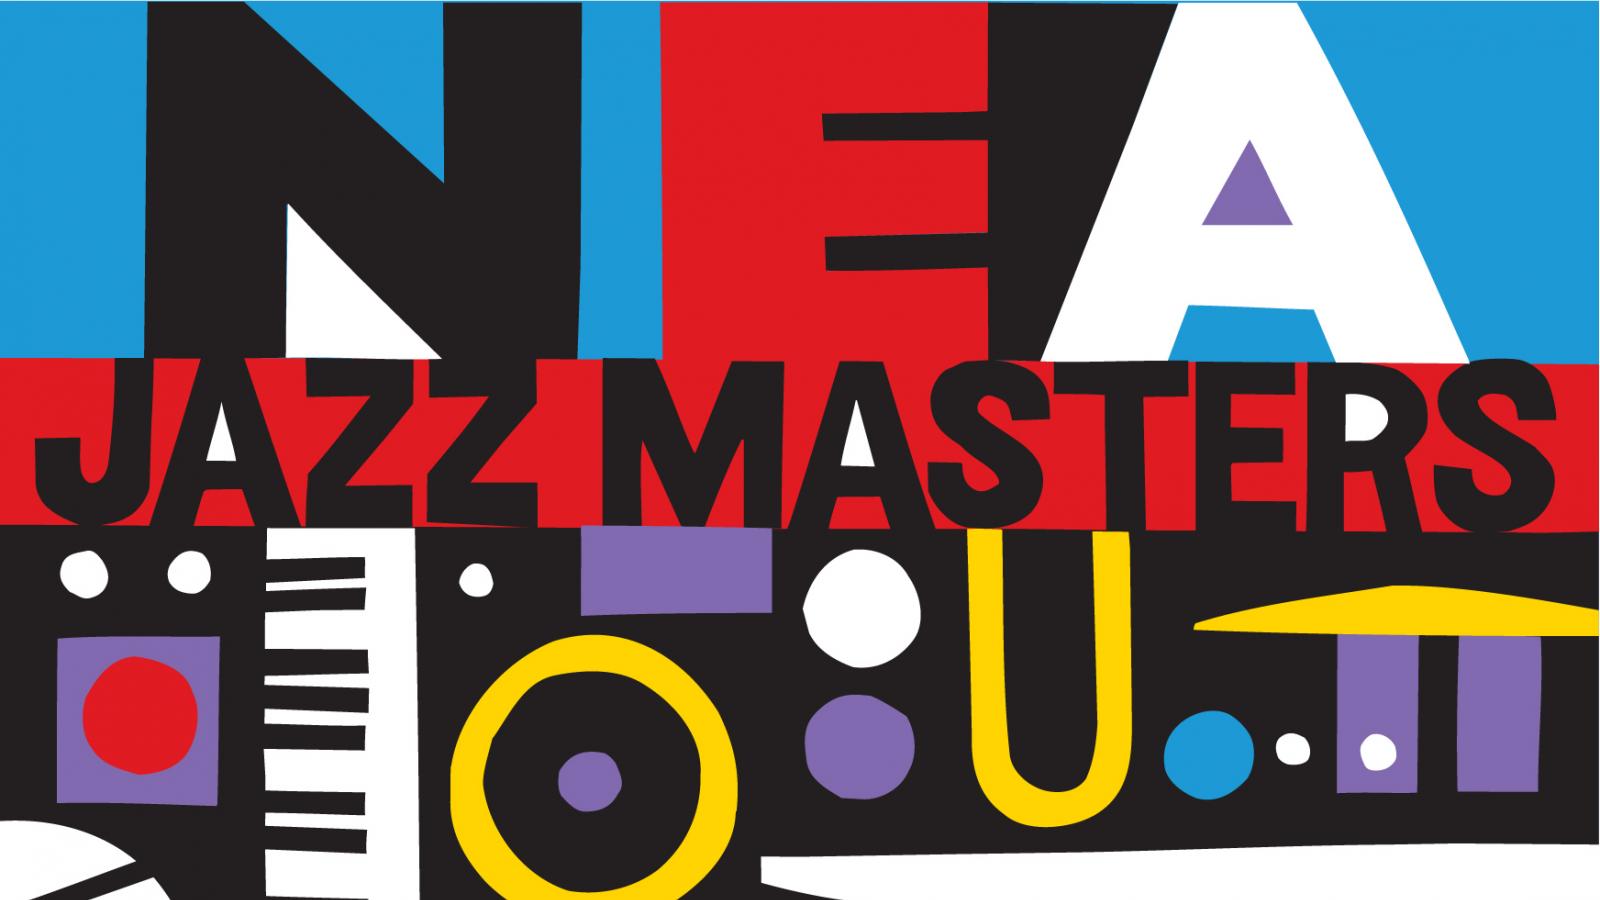 NEA Jazz Masters colorful logo with various shapes and colors.